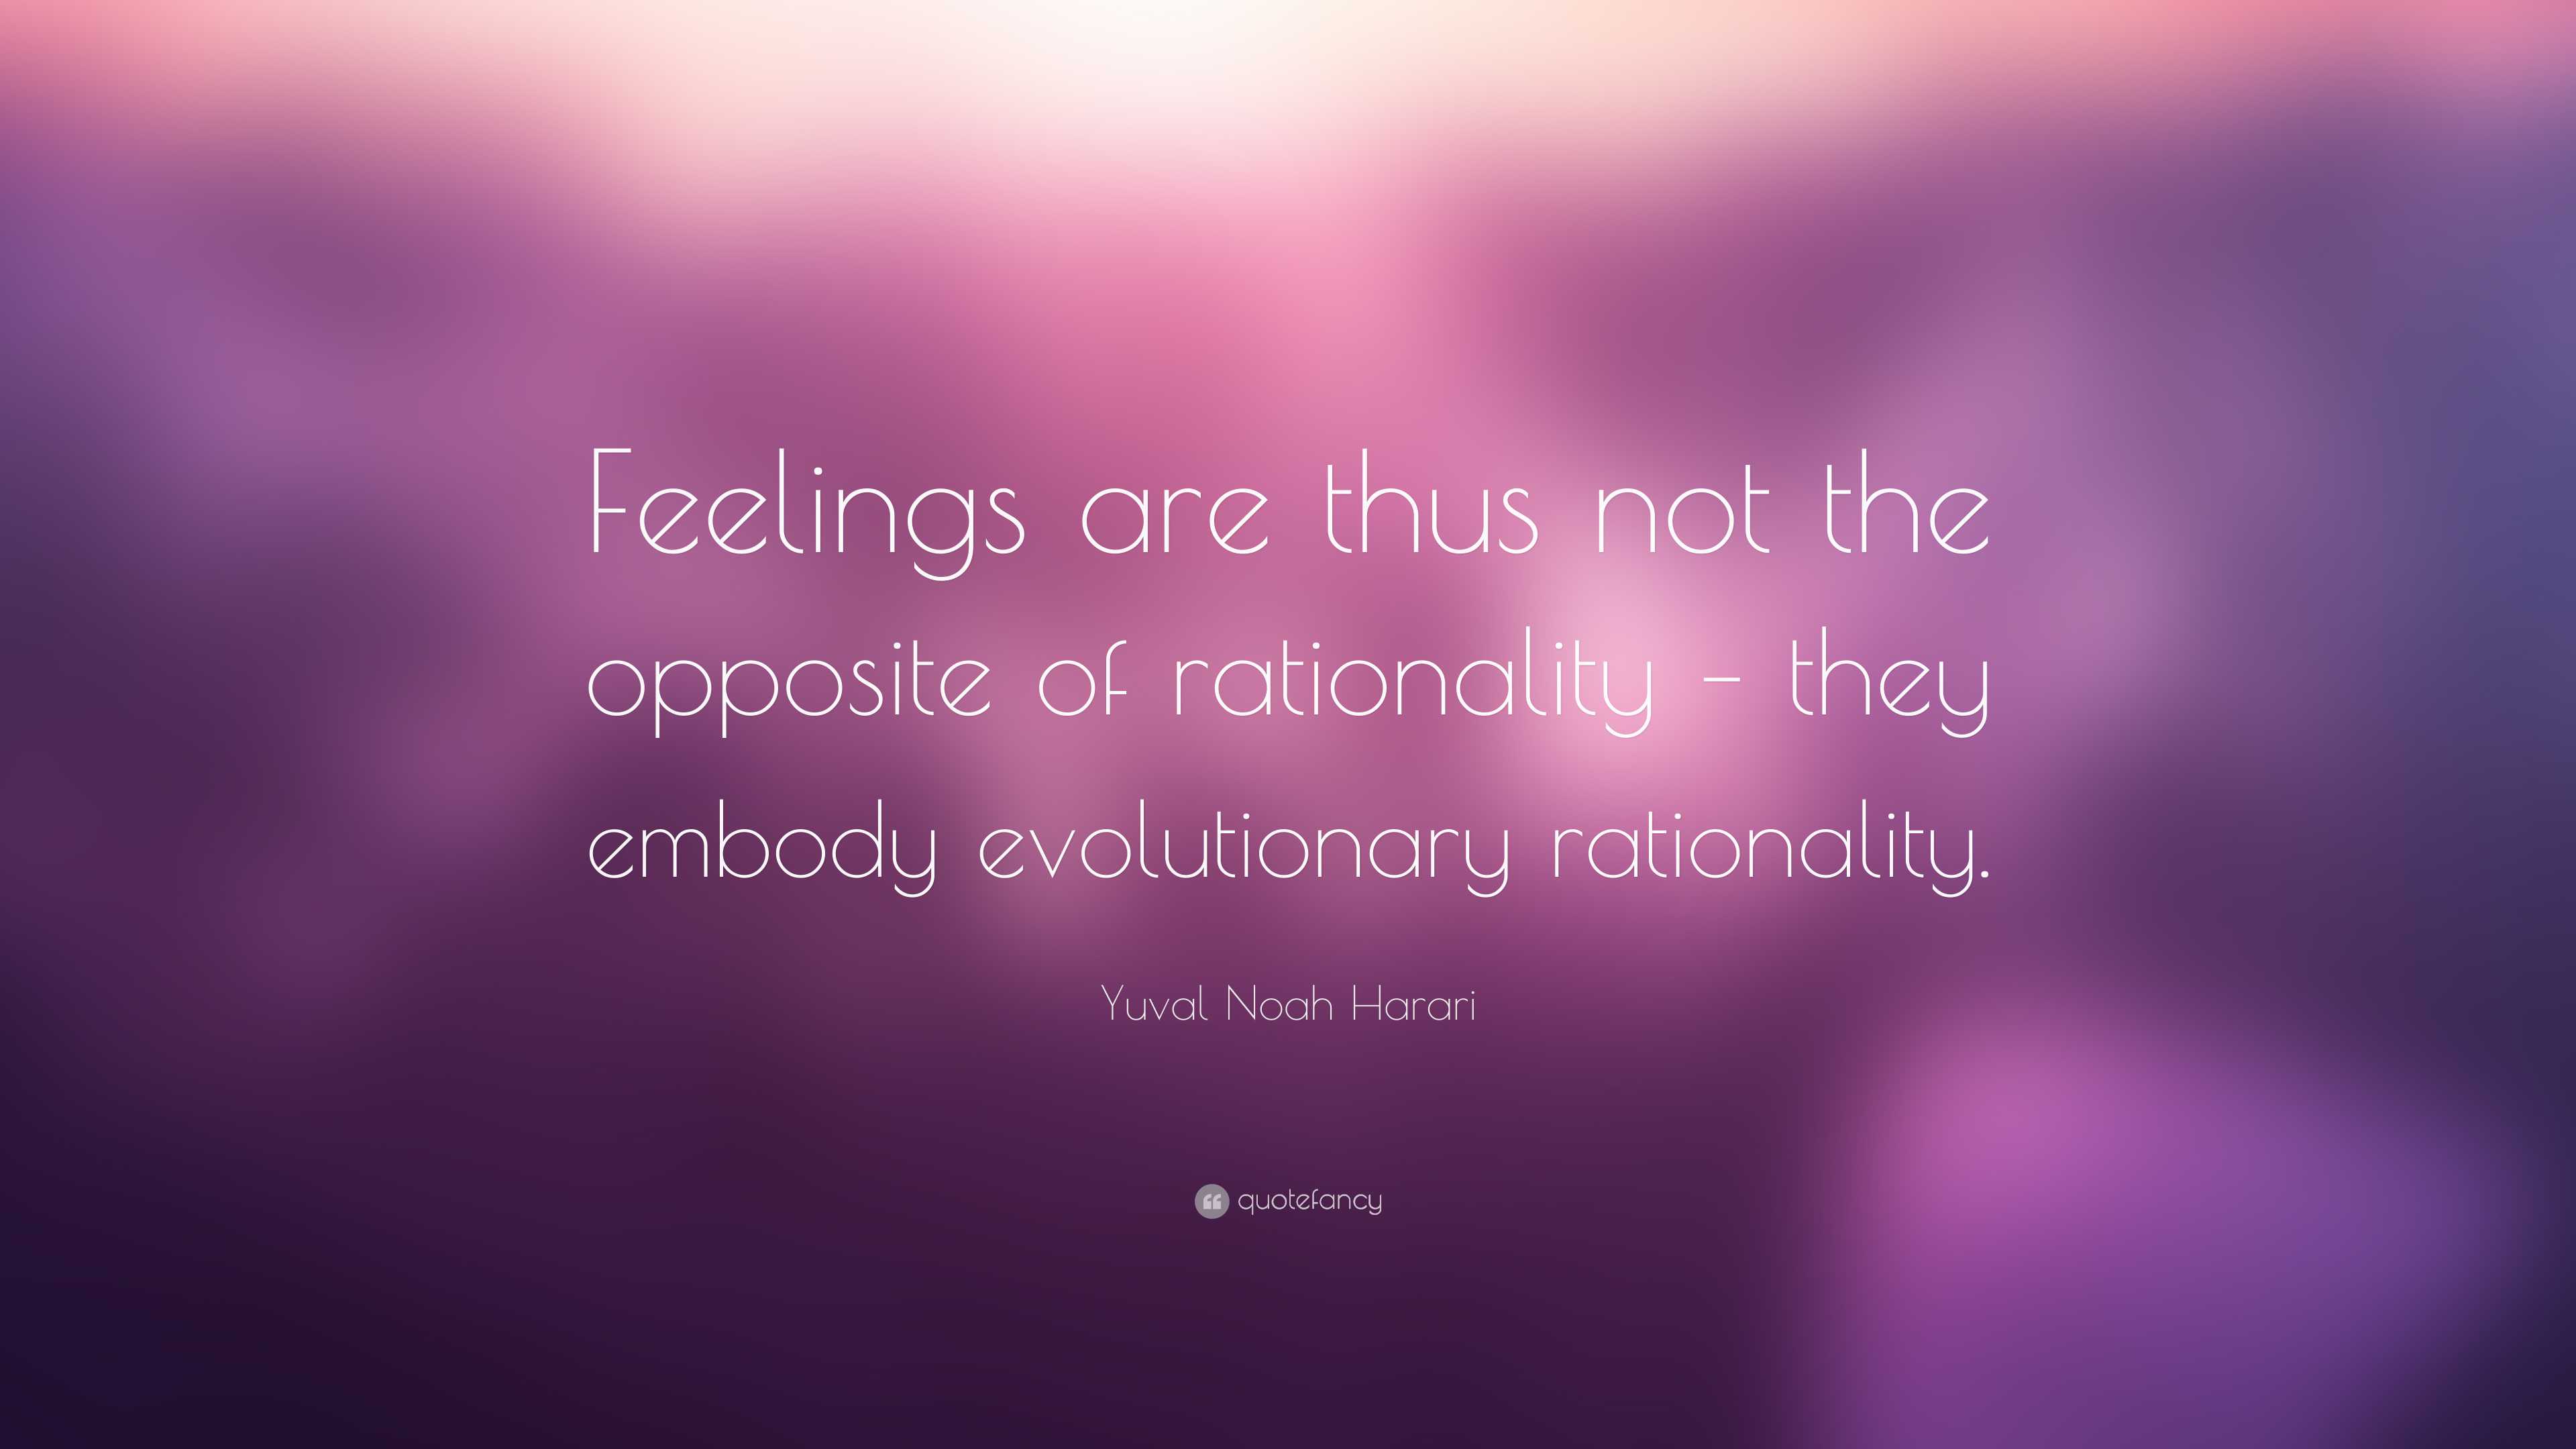 Yuval Noah Harari Quote: “Feelings are thus not the opposite of ...